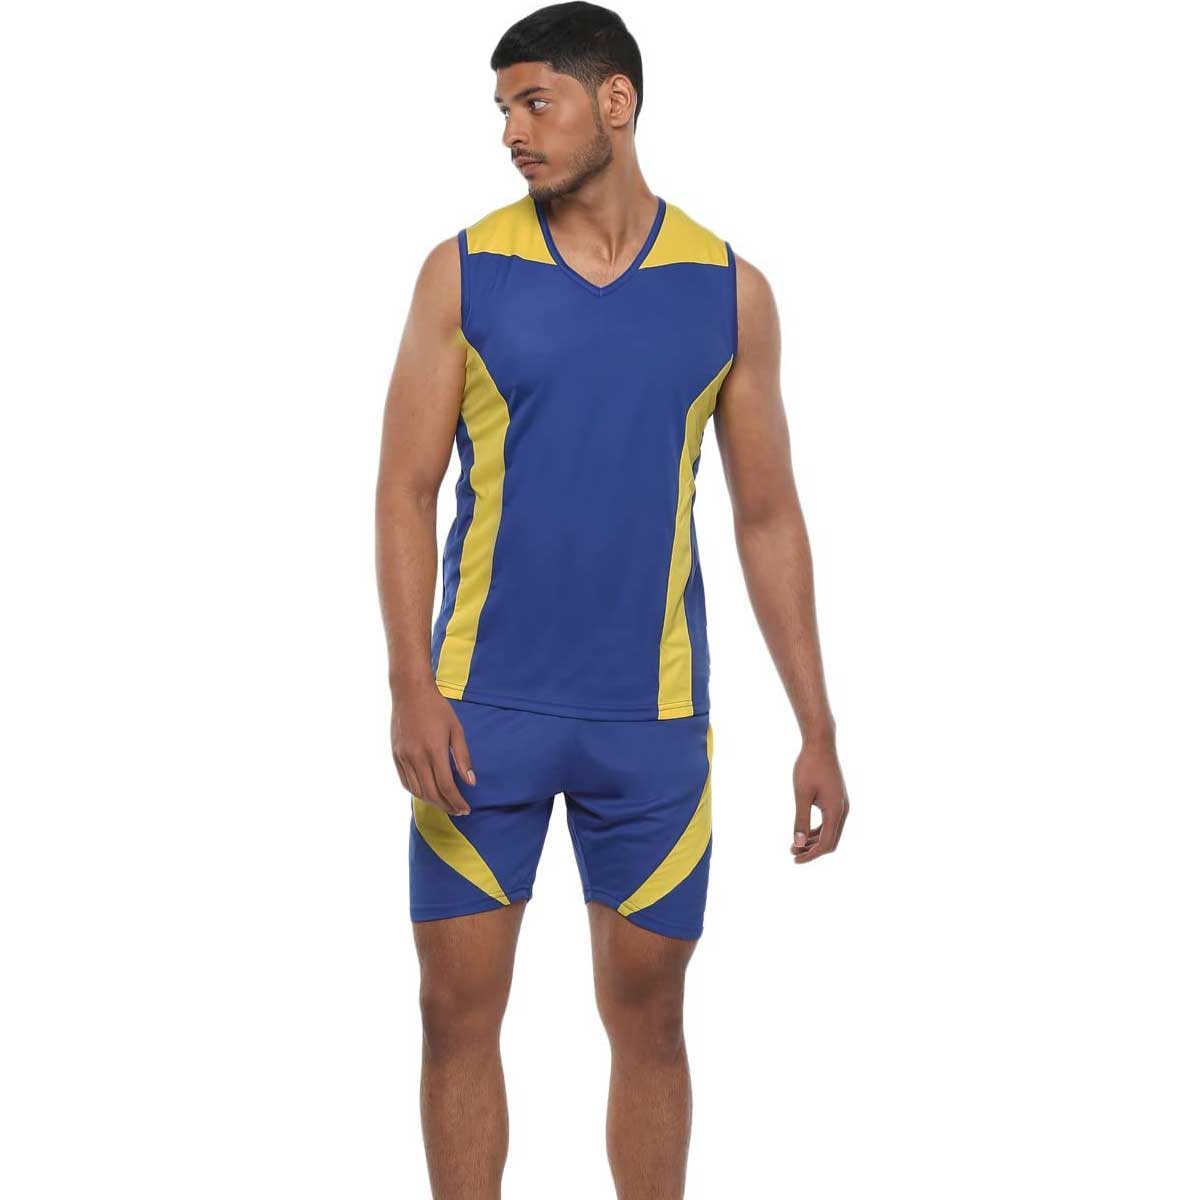 Cut and Sew Volleyball Jersey Manufacturers in Blagoveshchensk